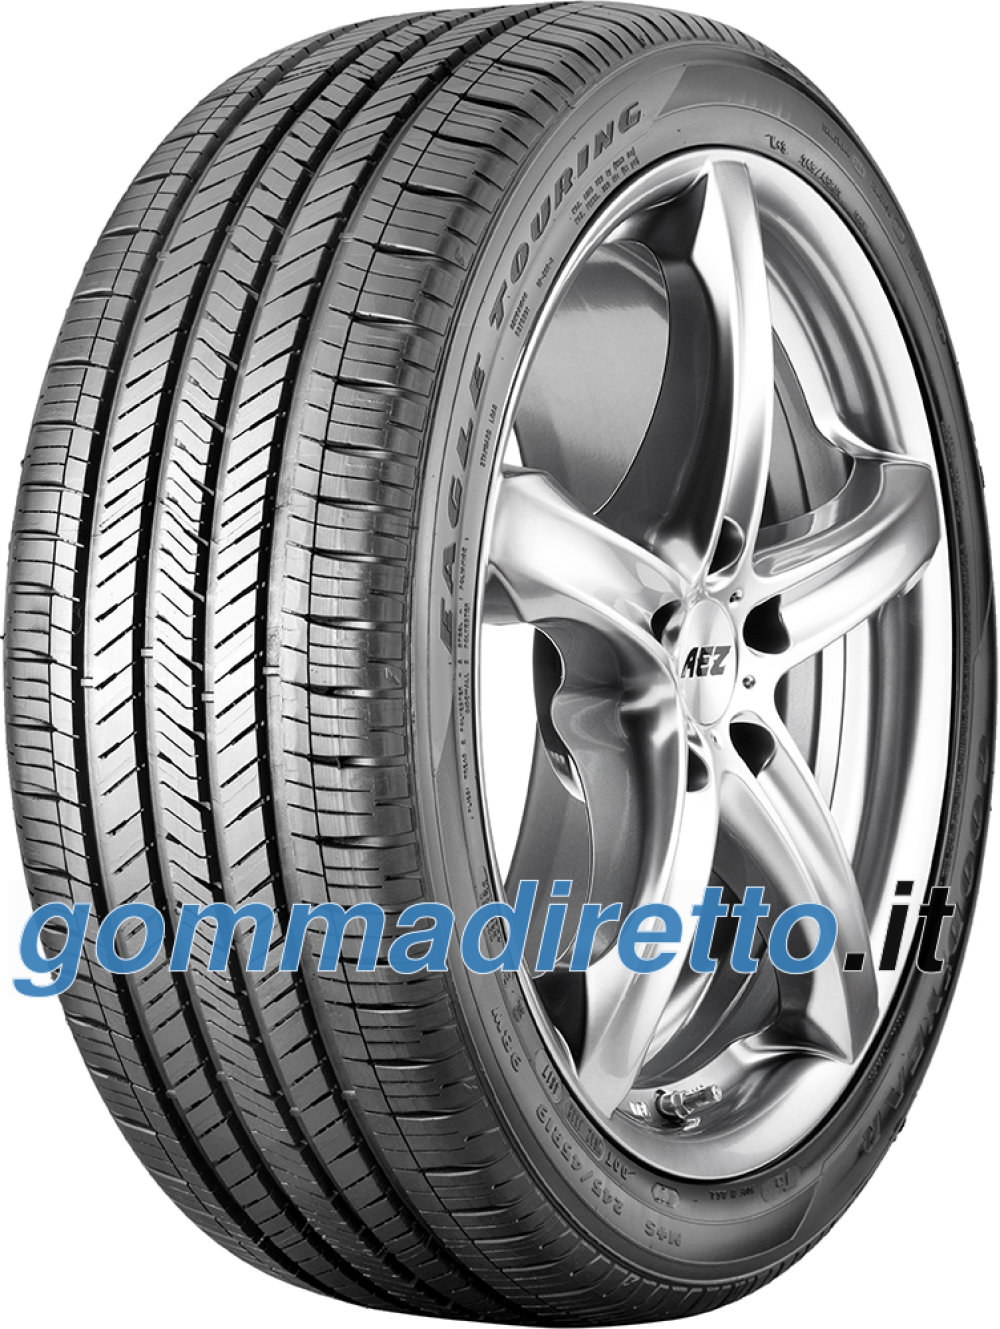 Image of Goodyear Eagle Touring ( 305/30 R21 104H XL, NF0 )